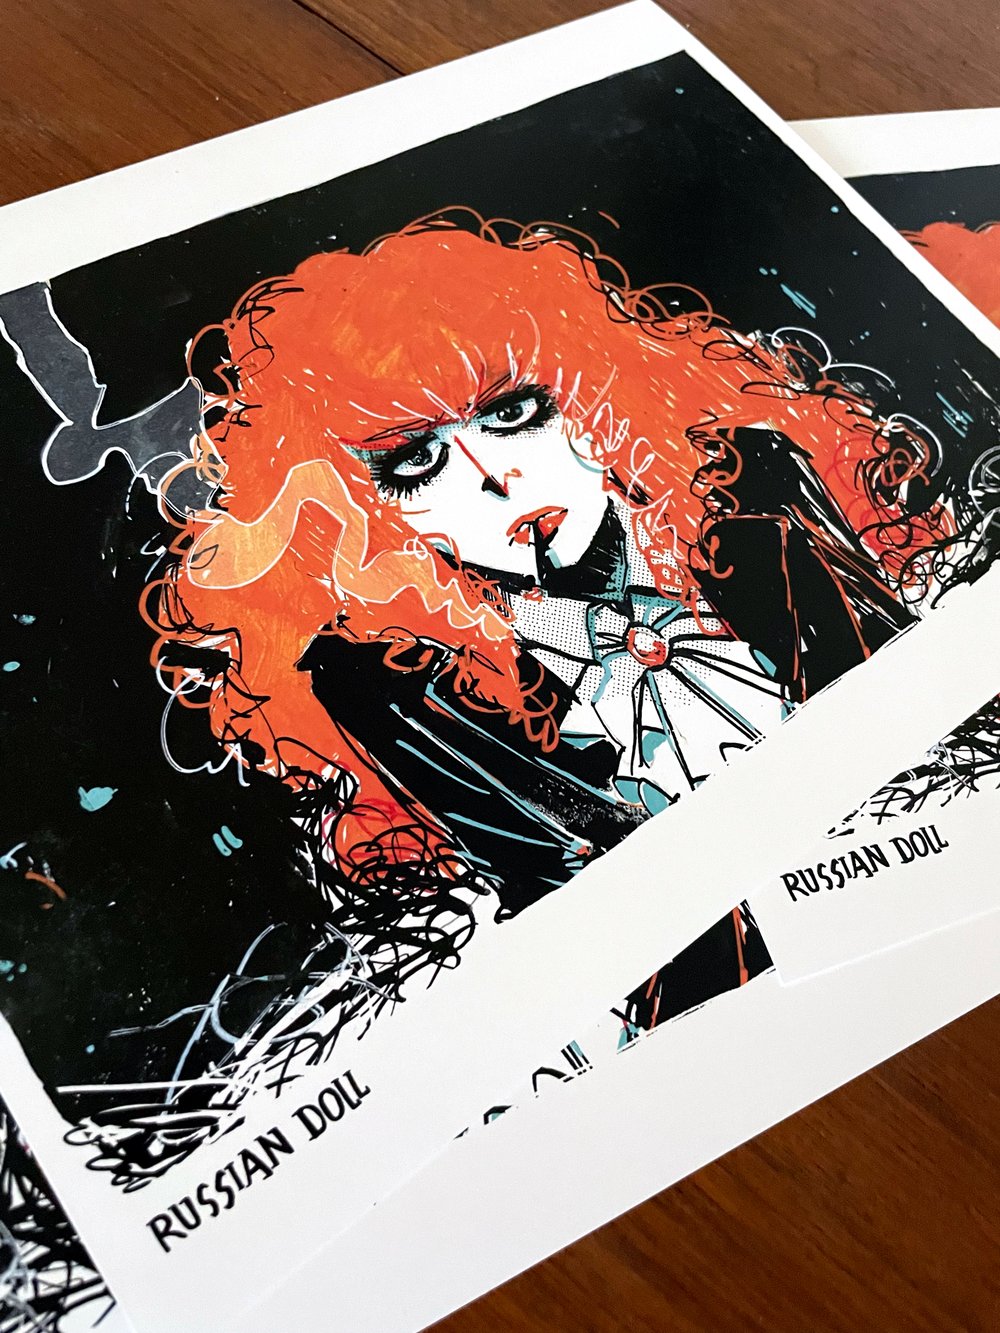 PRINT OF THE MONTH - Nadia - Russian Doll